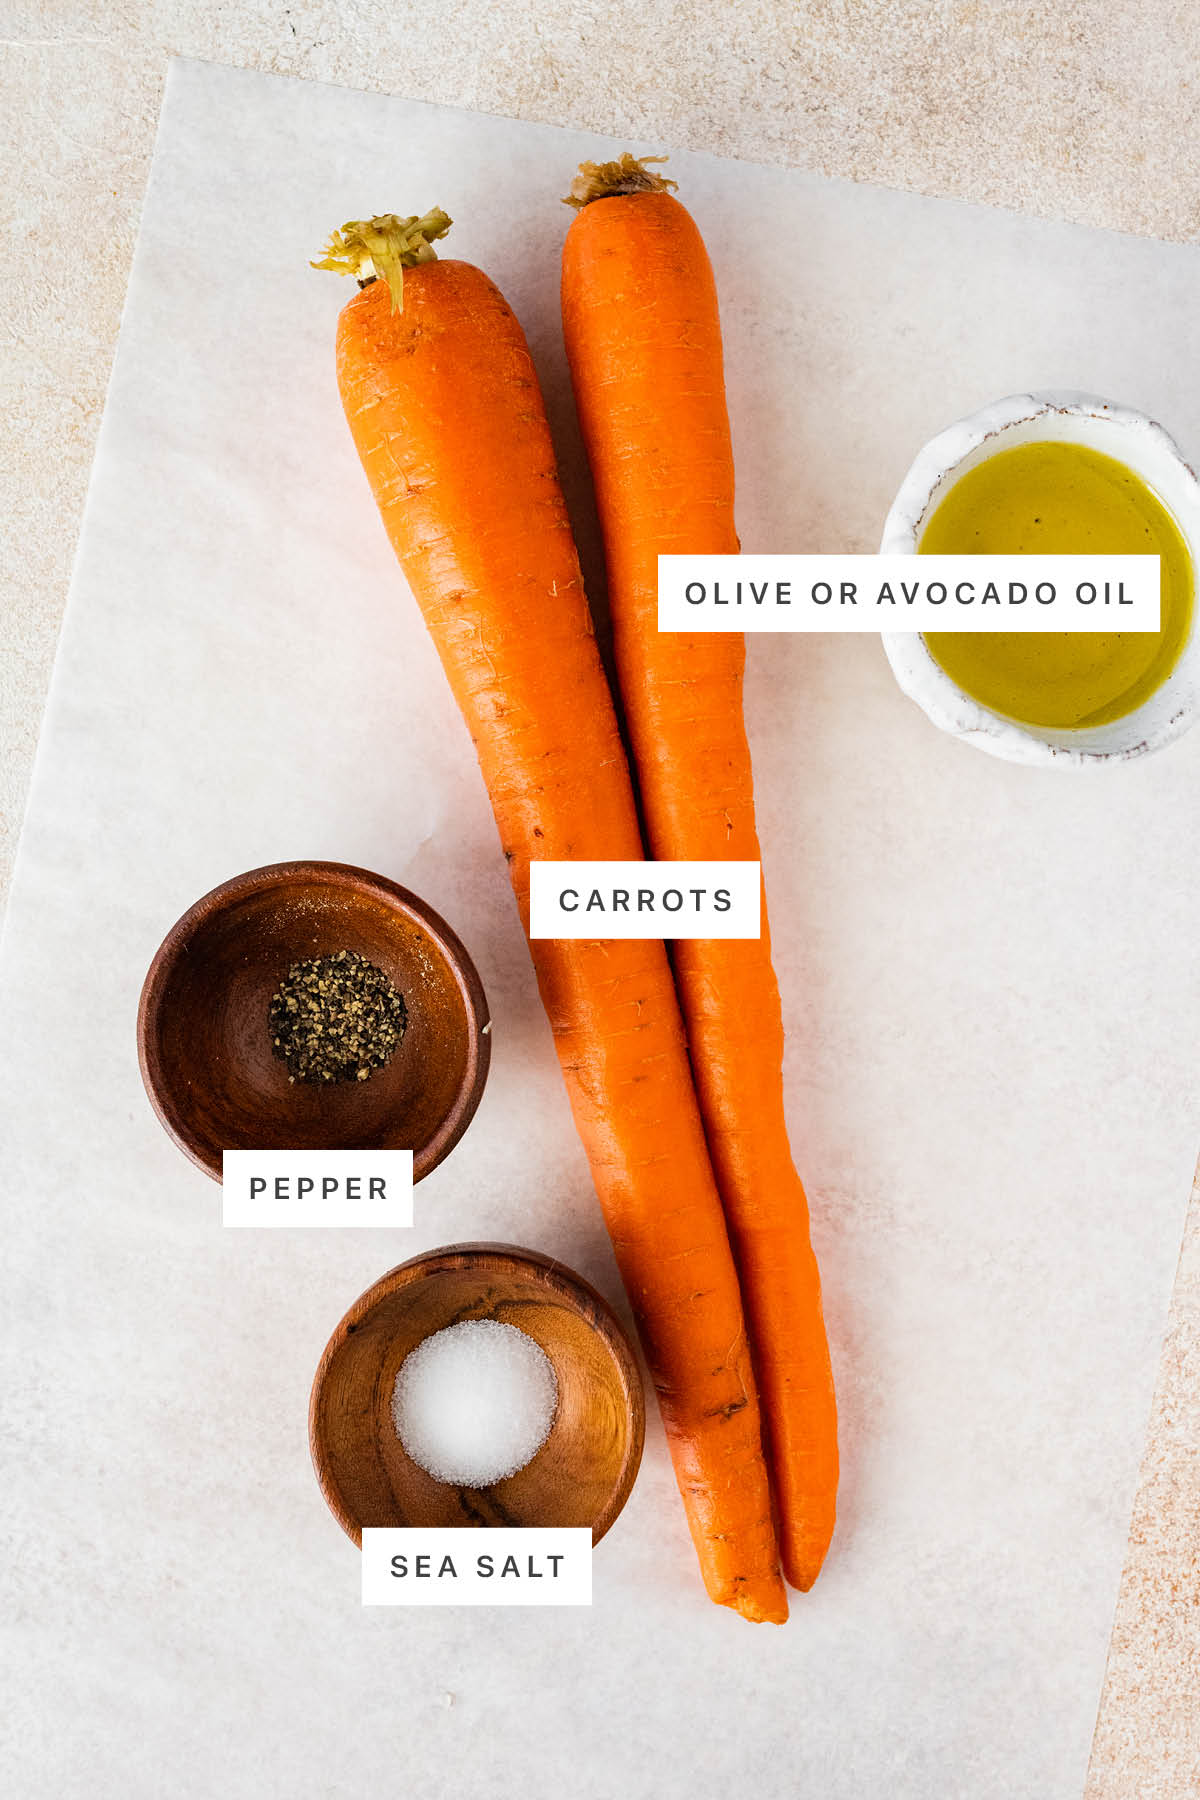 Ingredients measured out to make Air Fryer Carrots: olive oil, carrots, pepper and salt.